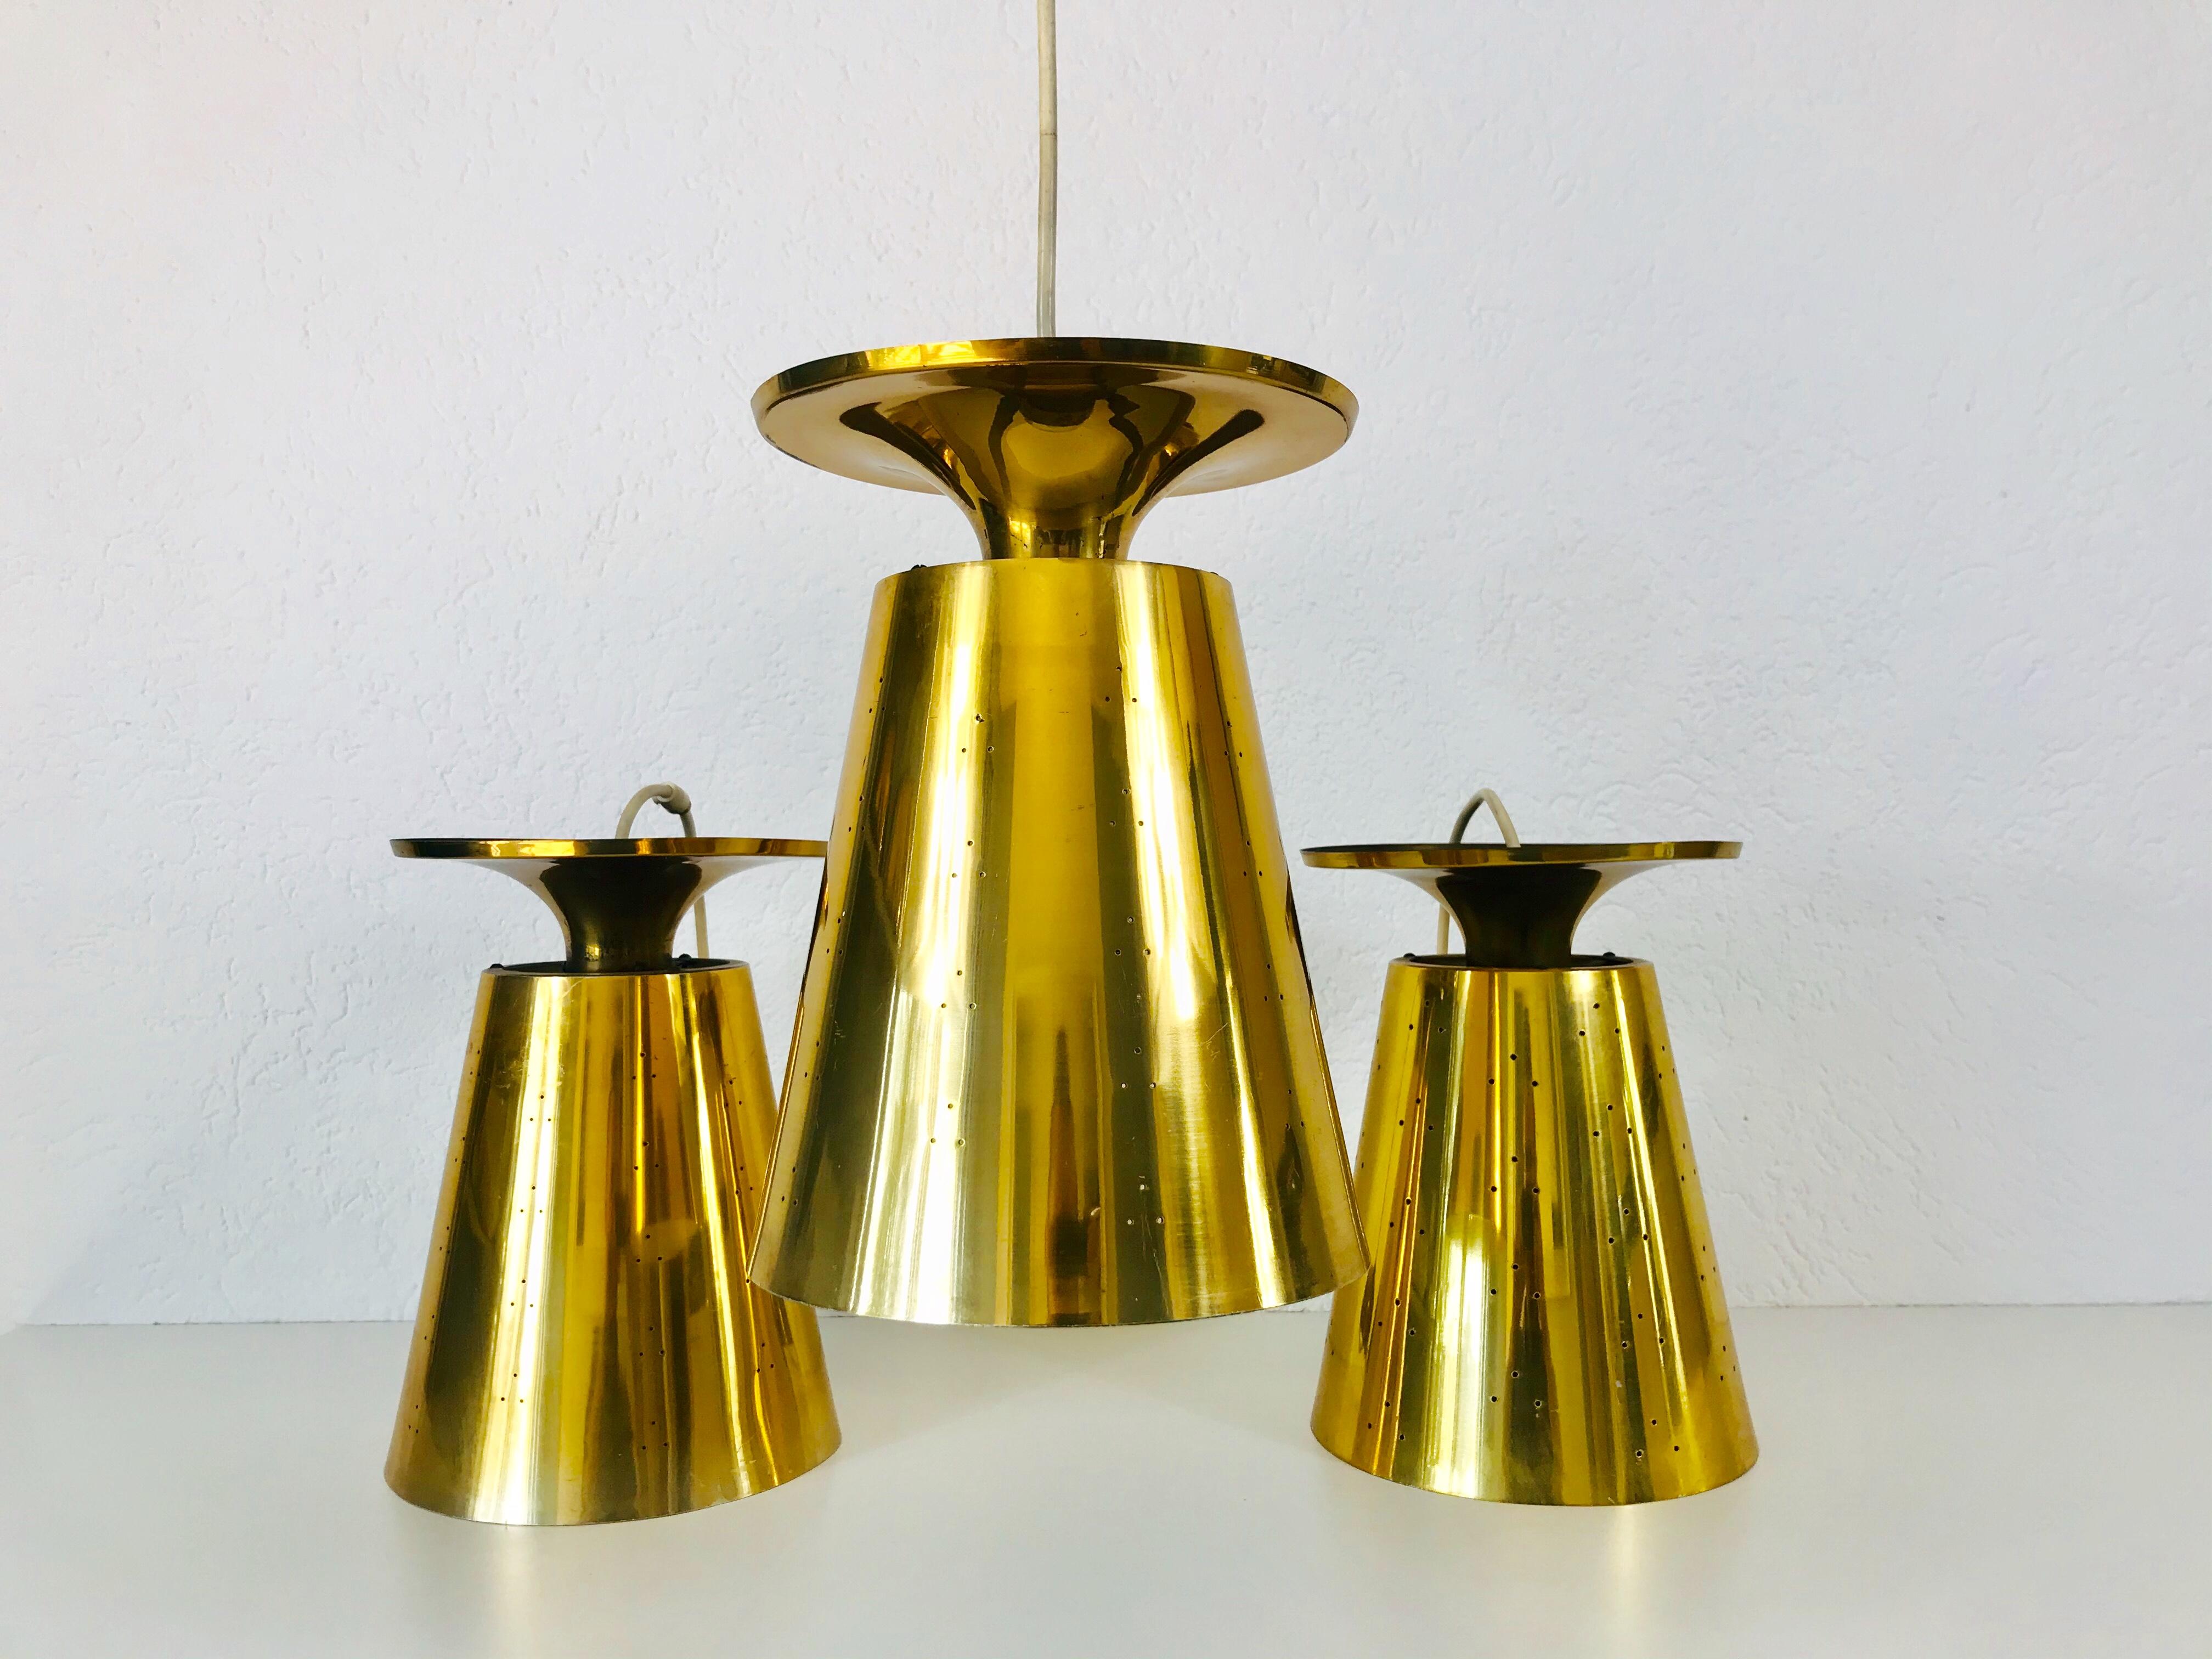 Set of three very rare pendant lamps attributed to Paavo Tynell, made in Finland in the 1950s. The lighting is made of full of brass. It has many small holes which are creating beautiful light. The lighting requires one E27 light bulb.

Measures: